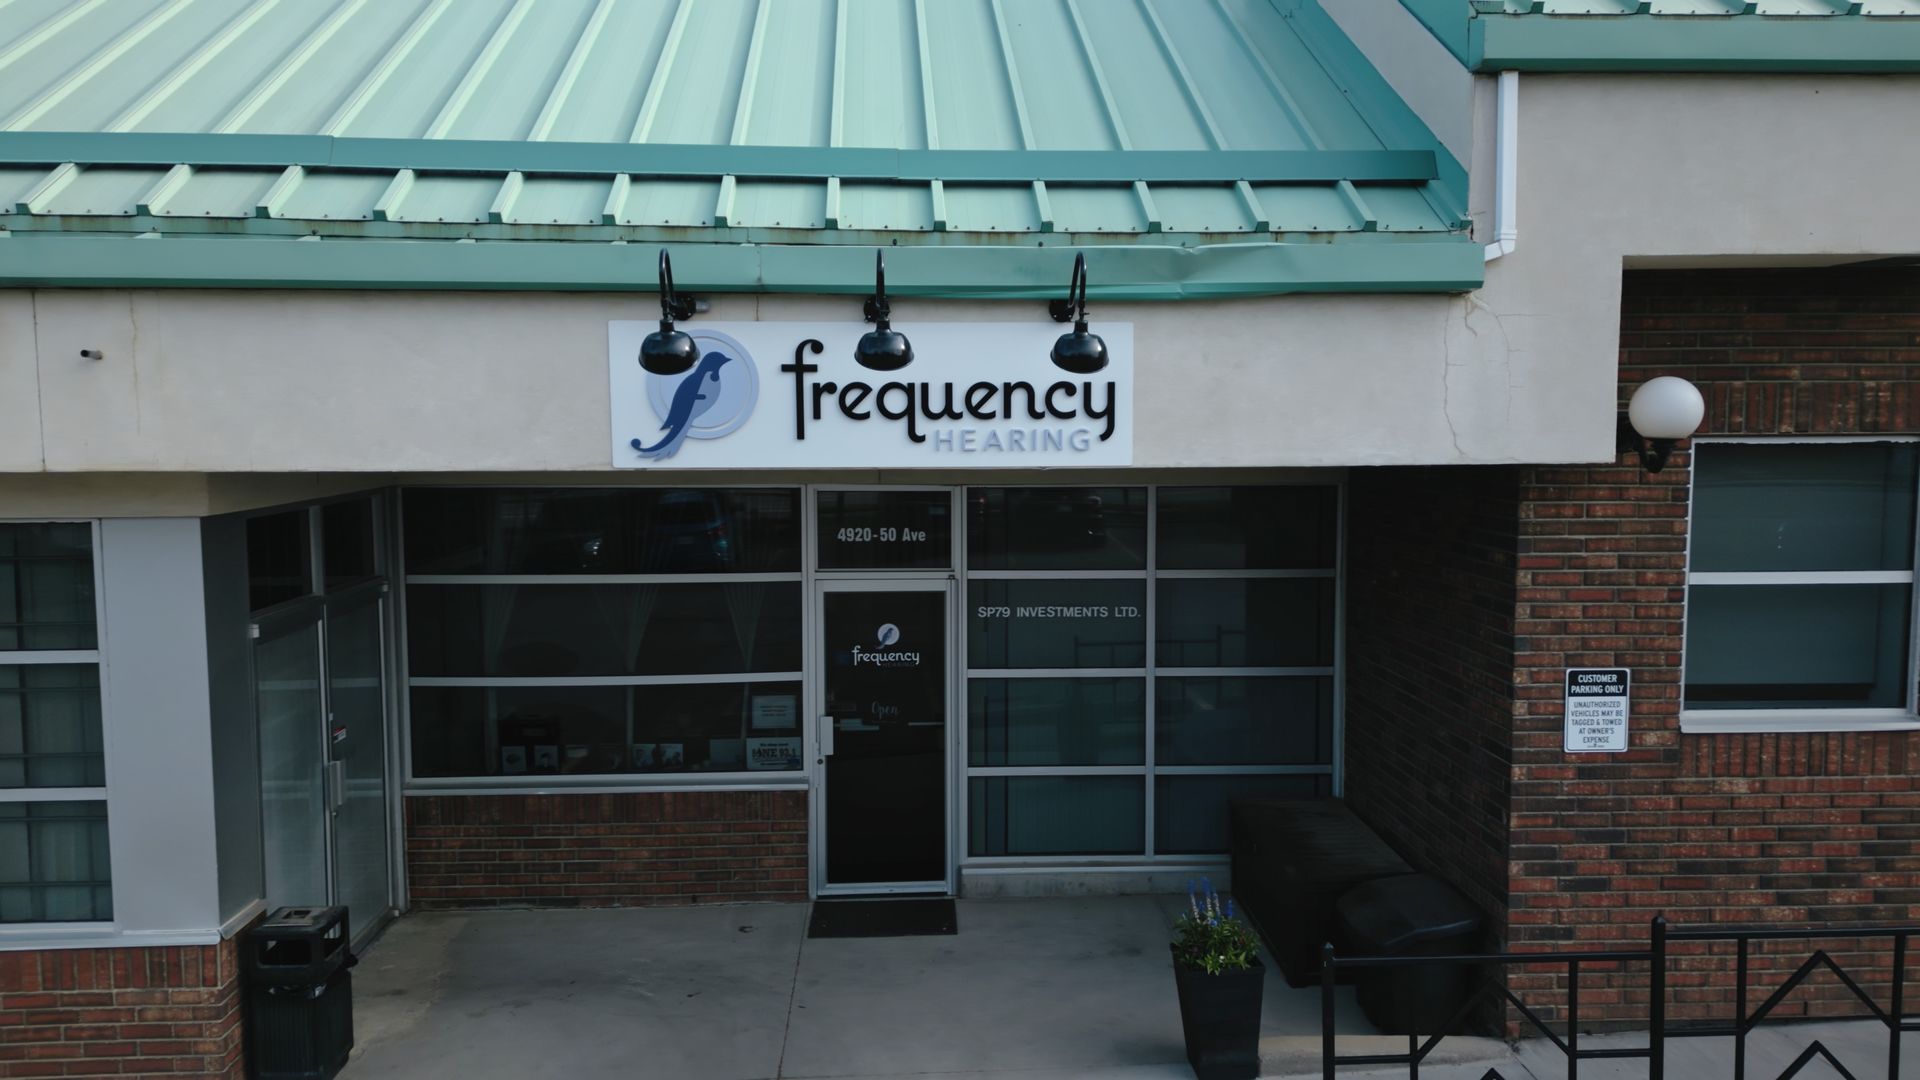 The entry way to Frequency Hearing in Beaumont, Alberta